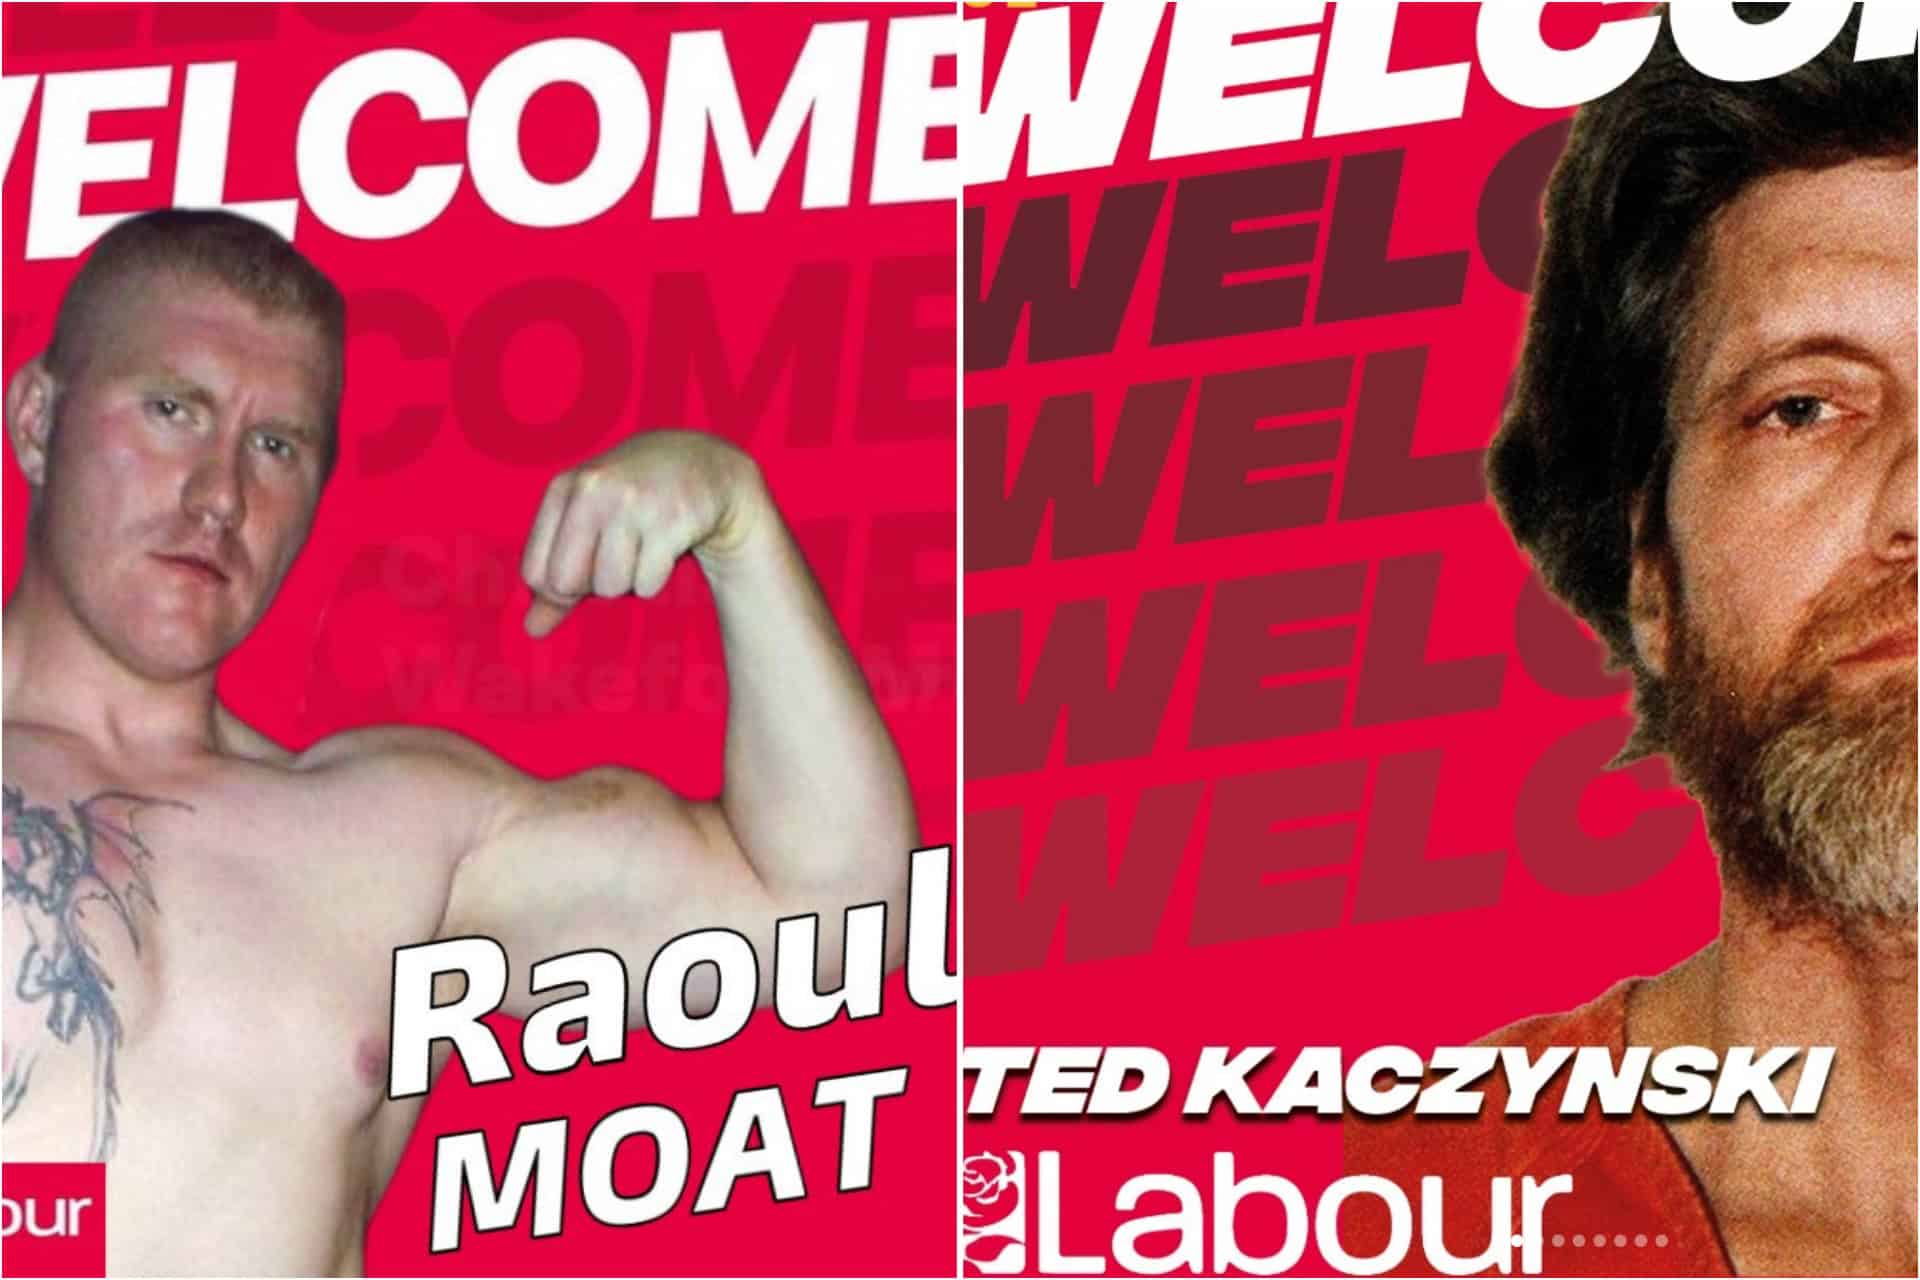 ‘Welcome to Labour’ memes make the rounds on social media following Elphicke’s defection